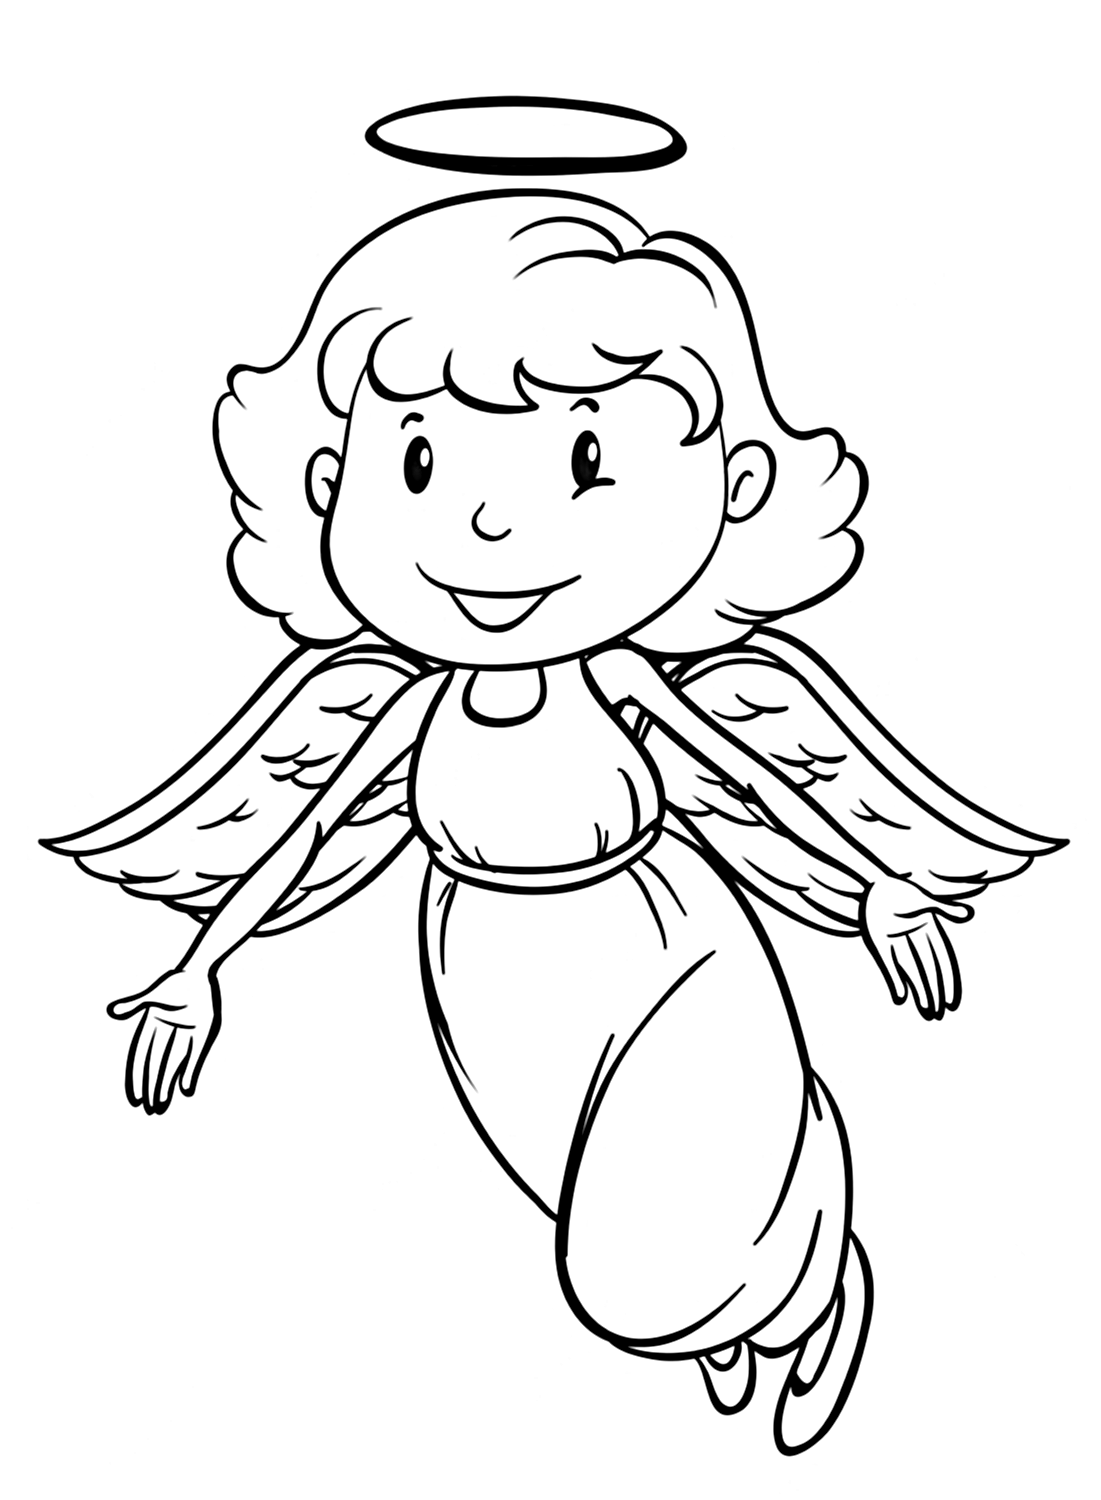 A little angel coloring page